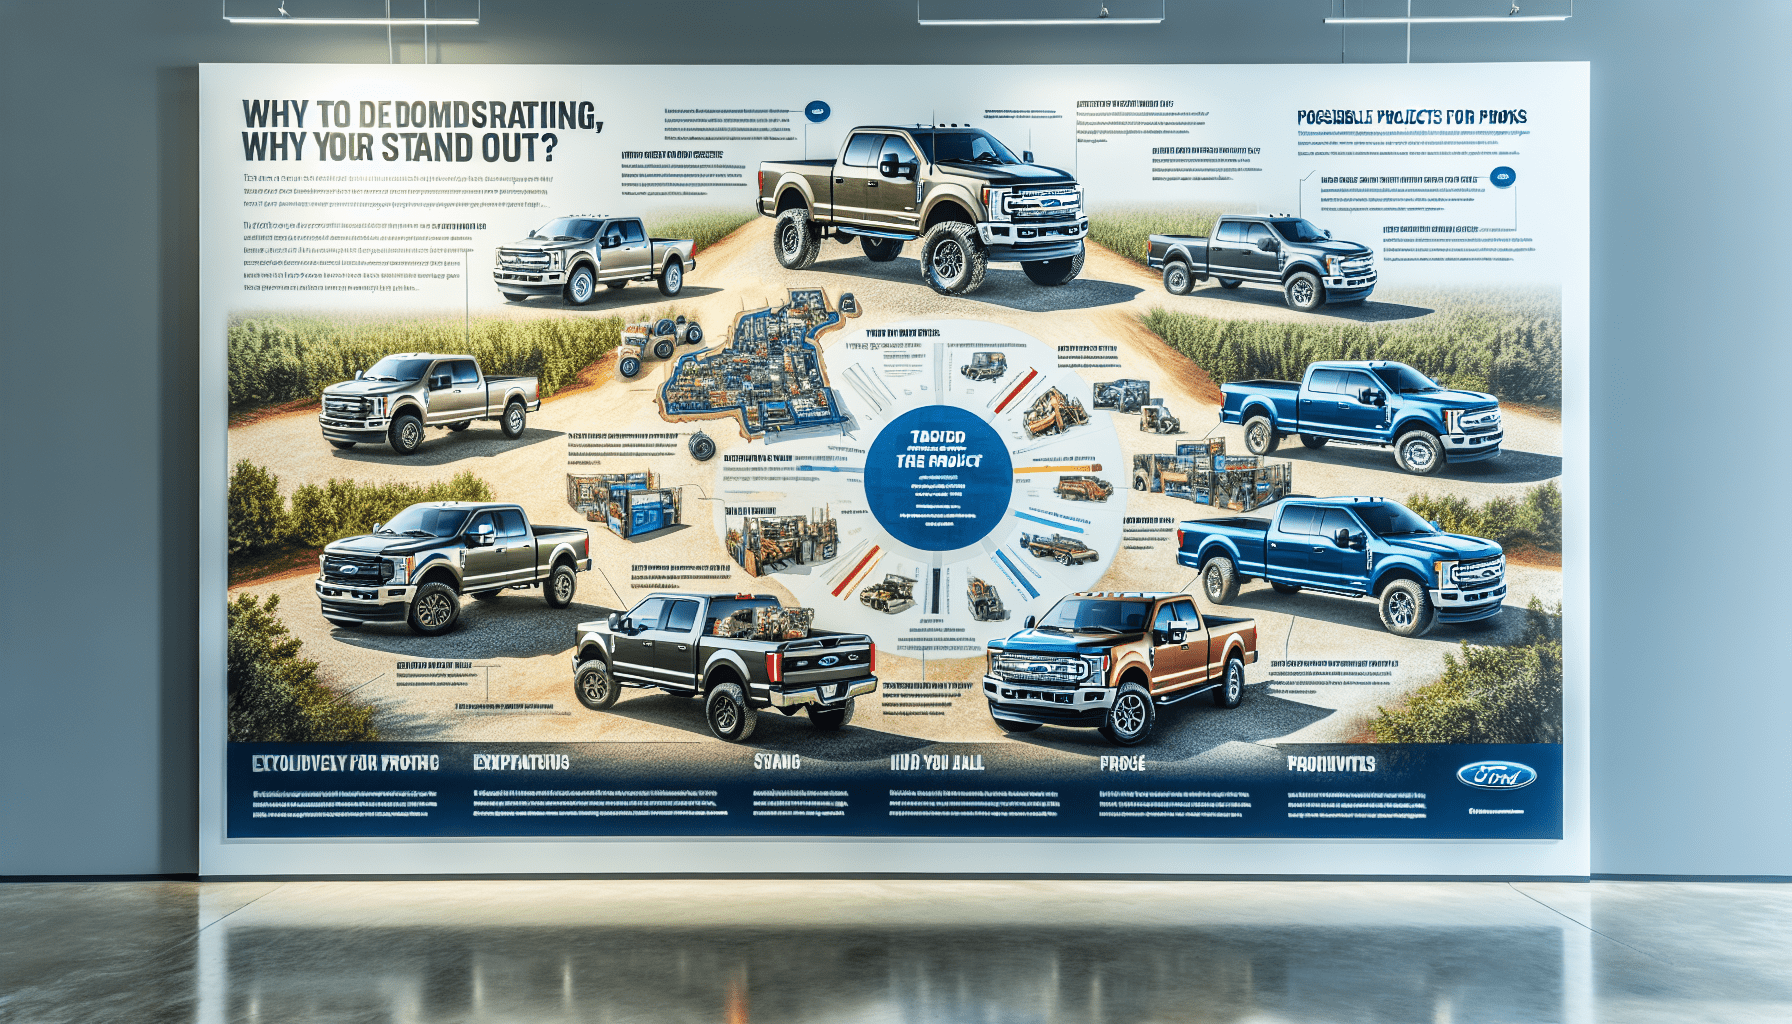 The Best Ford Truck Models For Project Enthusiasts